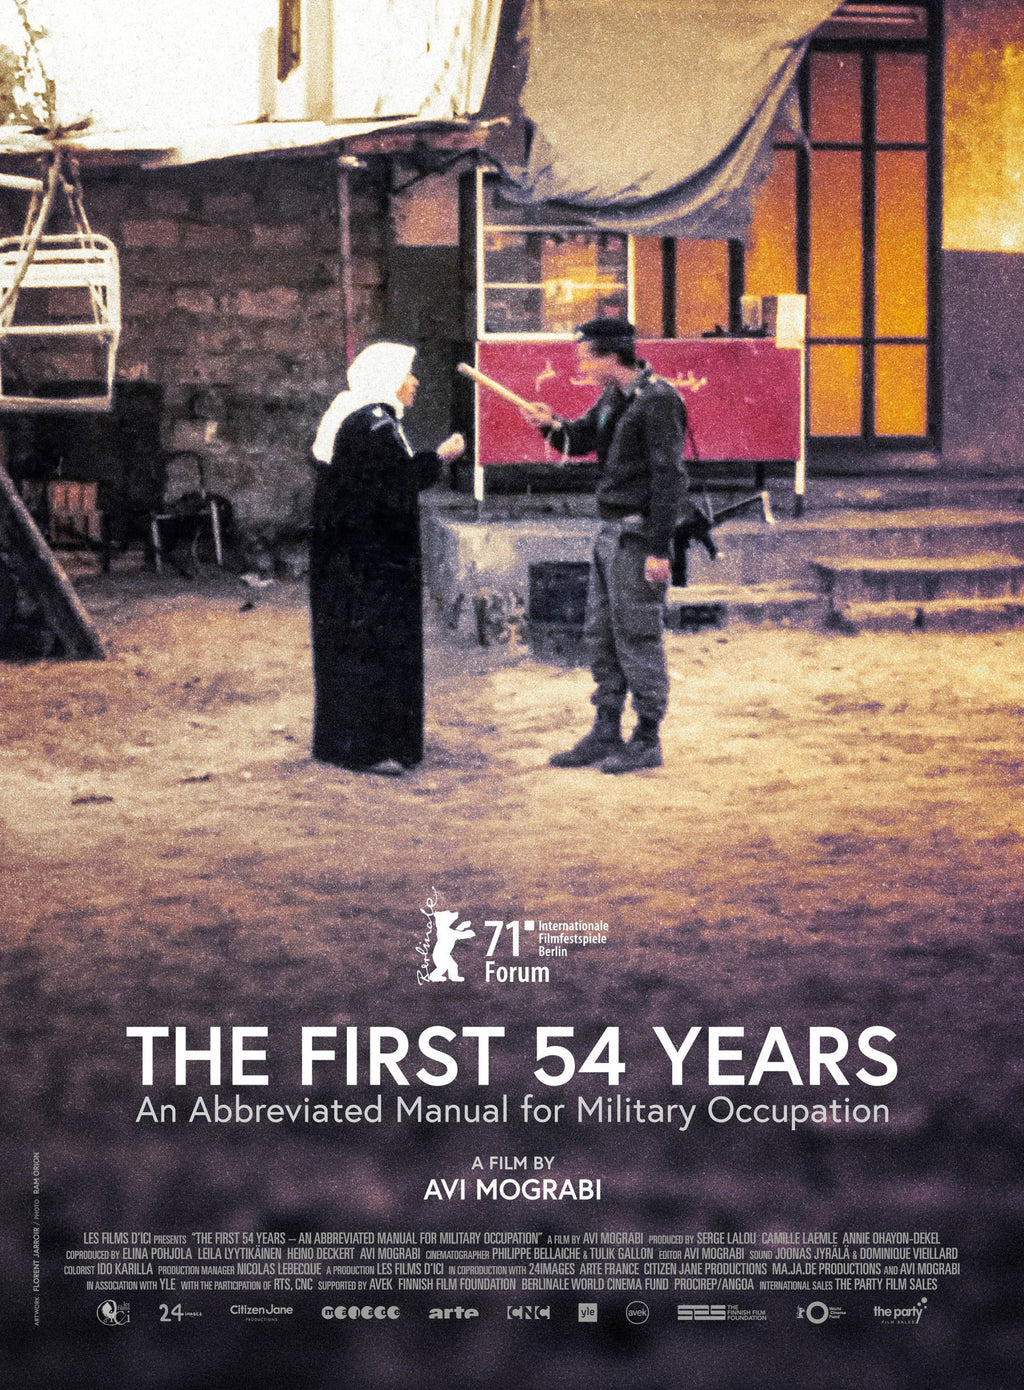 The First 54 Years – An Abbreviated Manual for Military Occupation